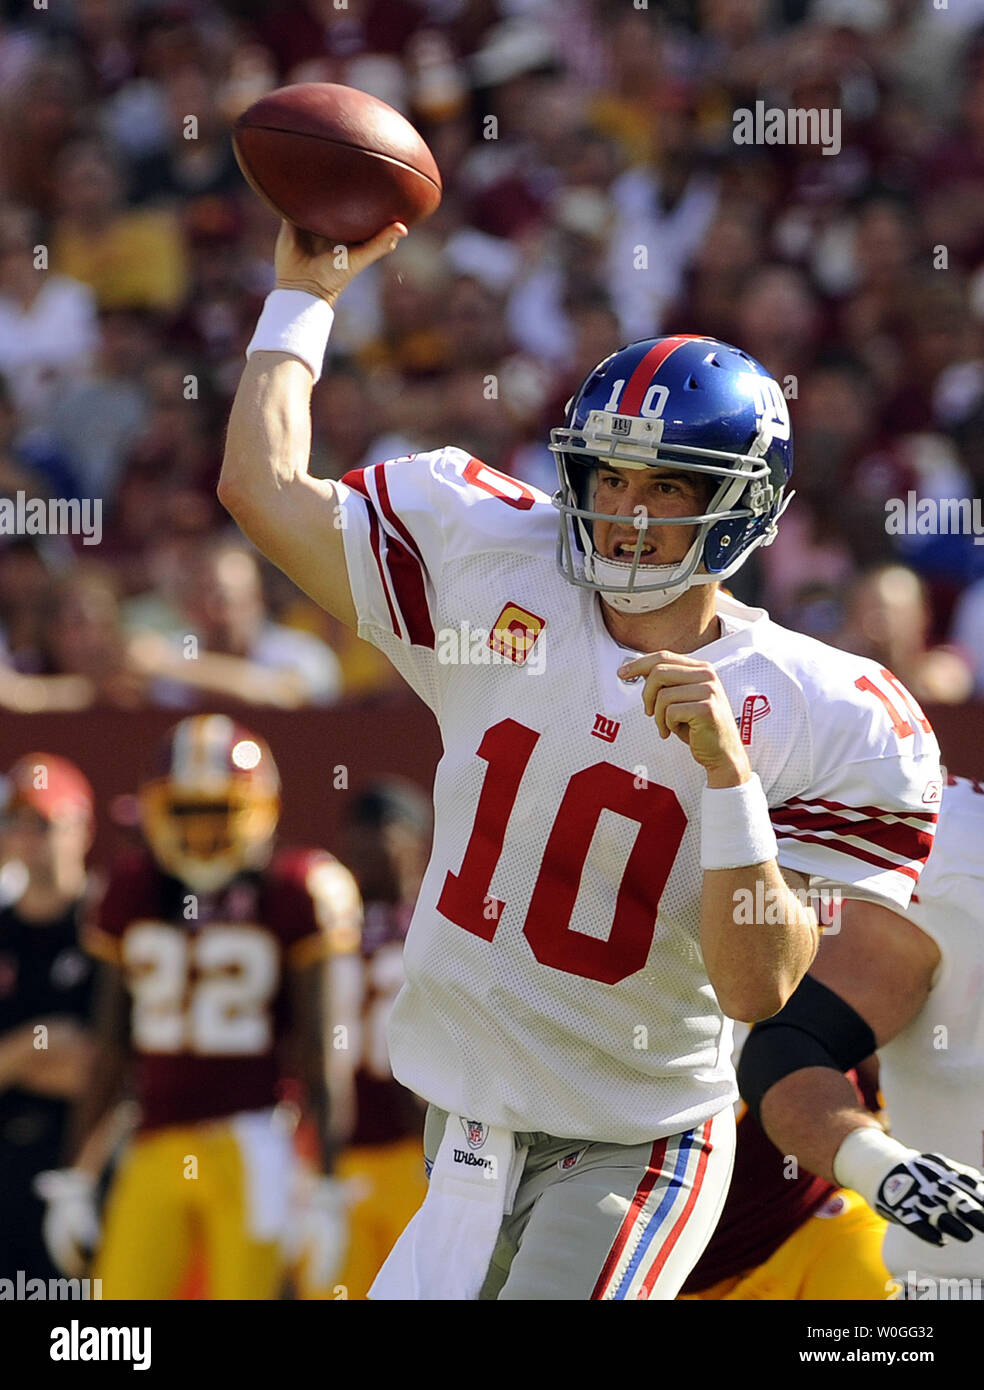 New York Giants quarterback Eli Manning throws a pass against the  Washington Redskins in the first